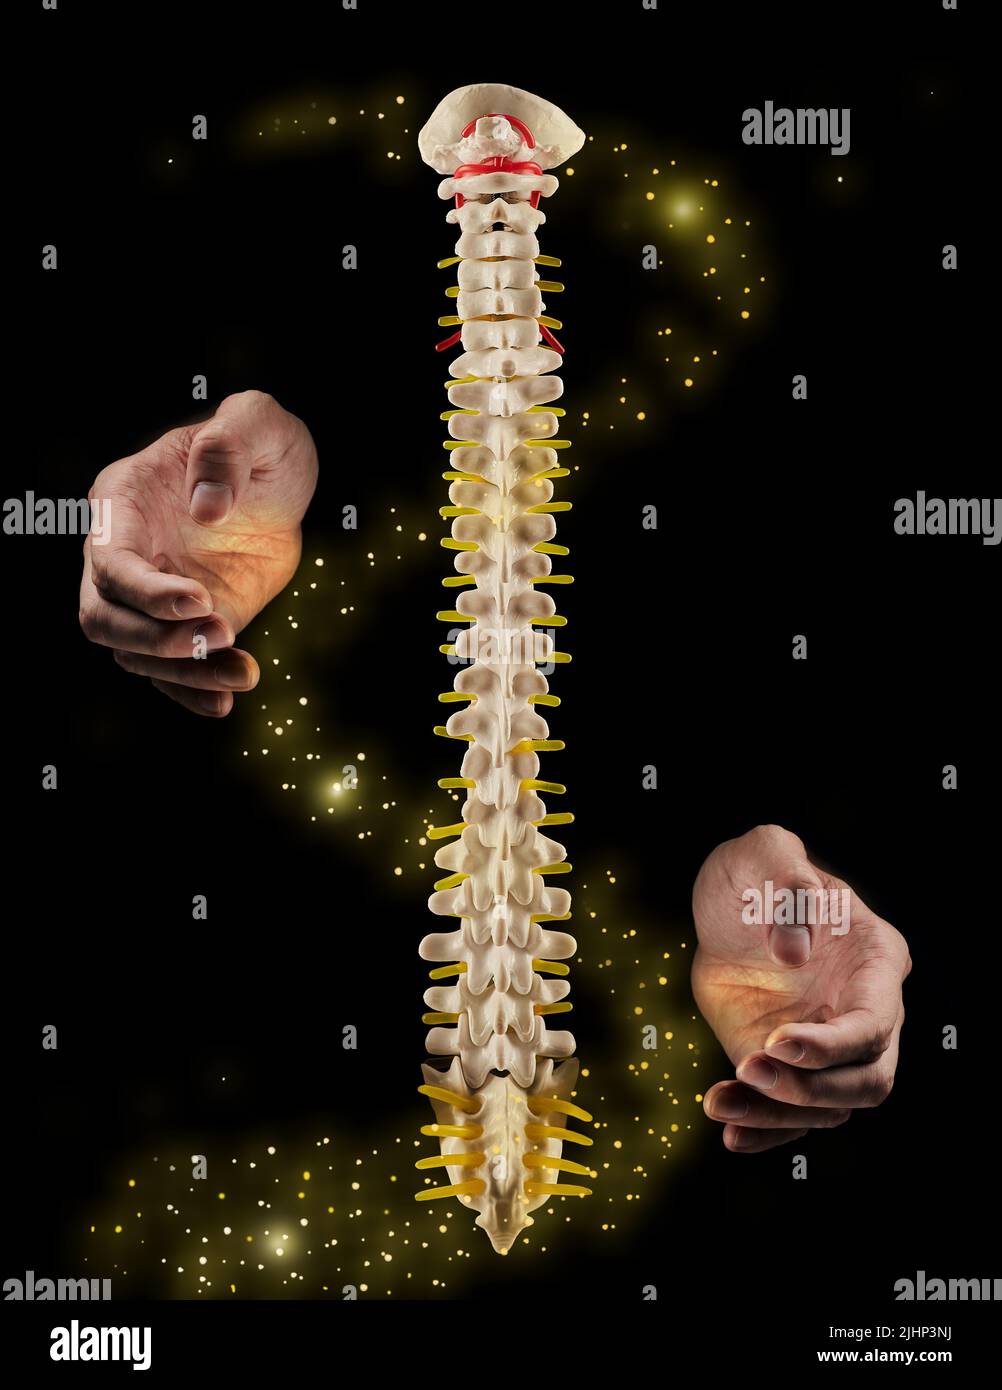 Spine health concept. Hands of chiropractor do wonders with human spine or backbone, art visualization of human spine health on black background Stock Photo